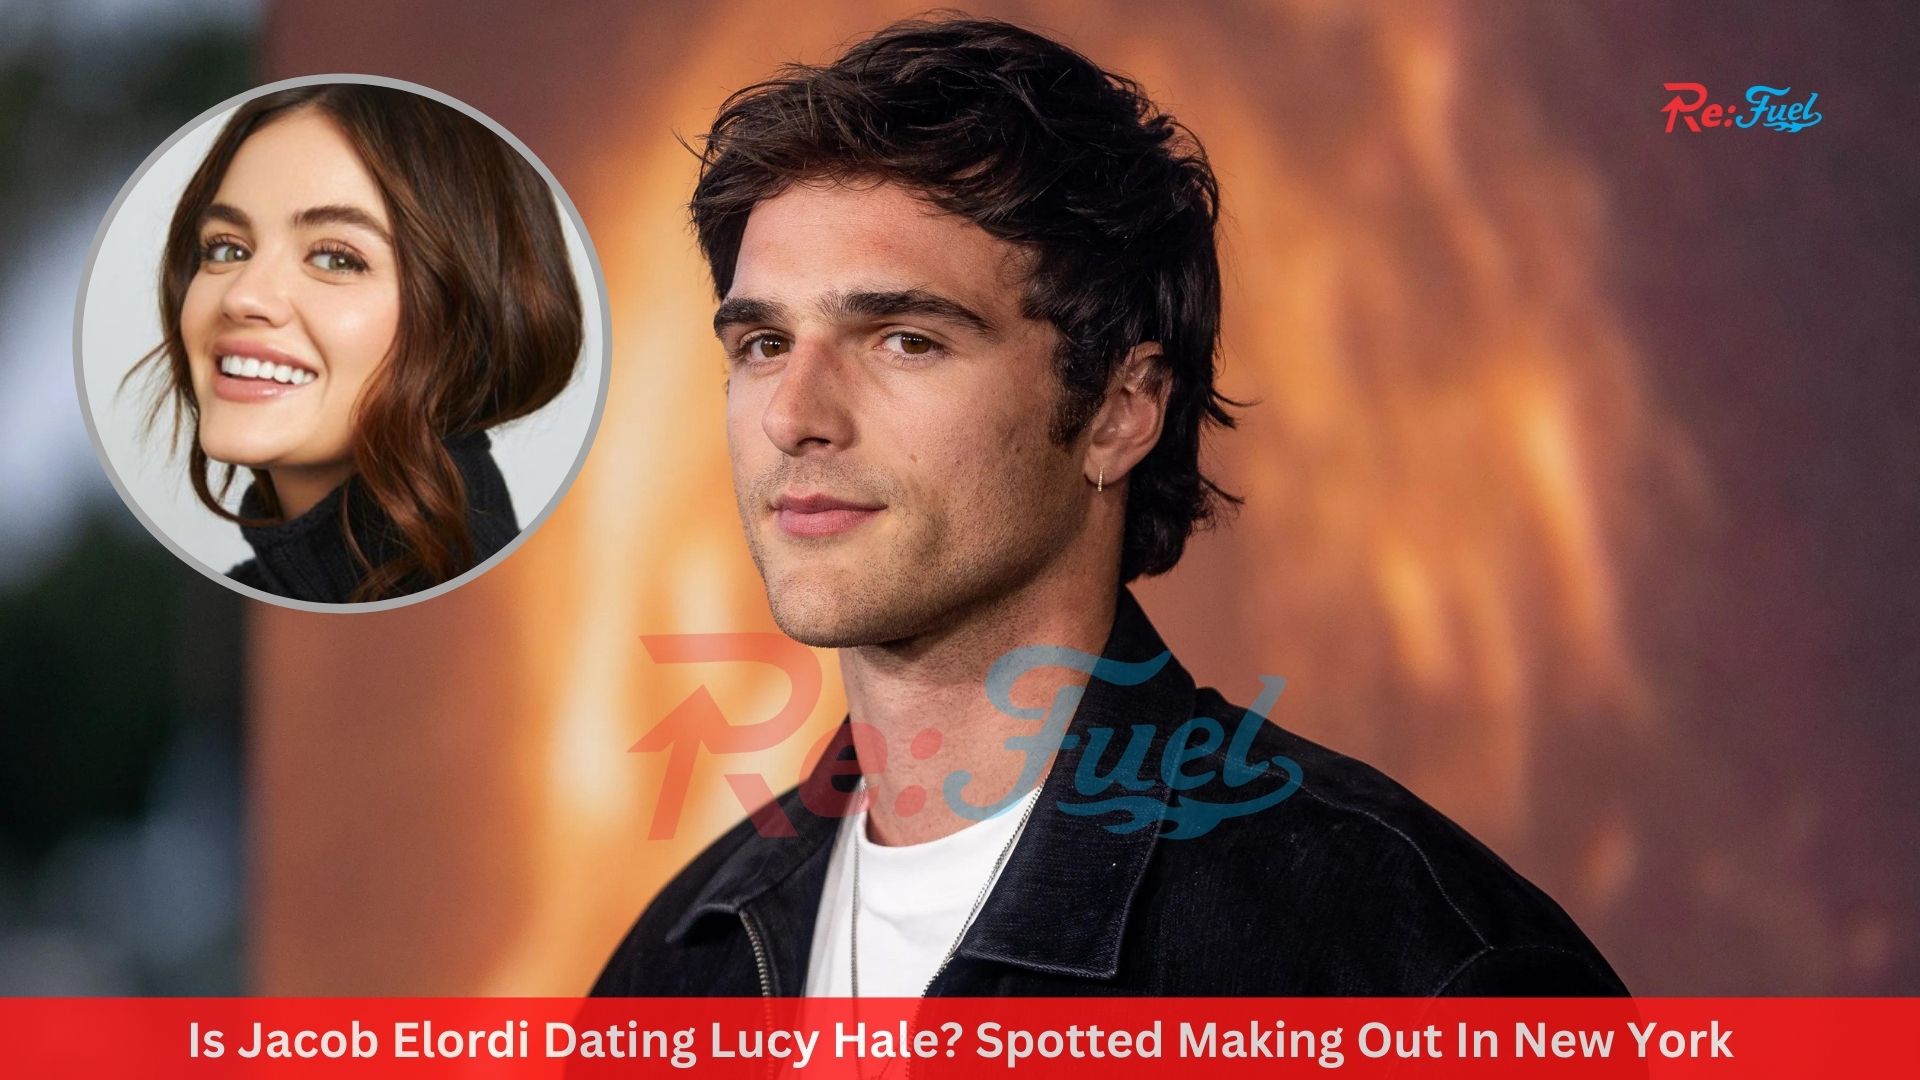 Is Jacob Elordi Dating Lucy Hale? Spotted Making Out In New York